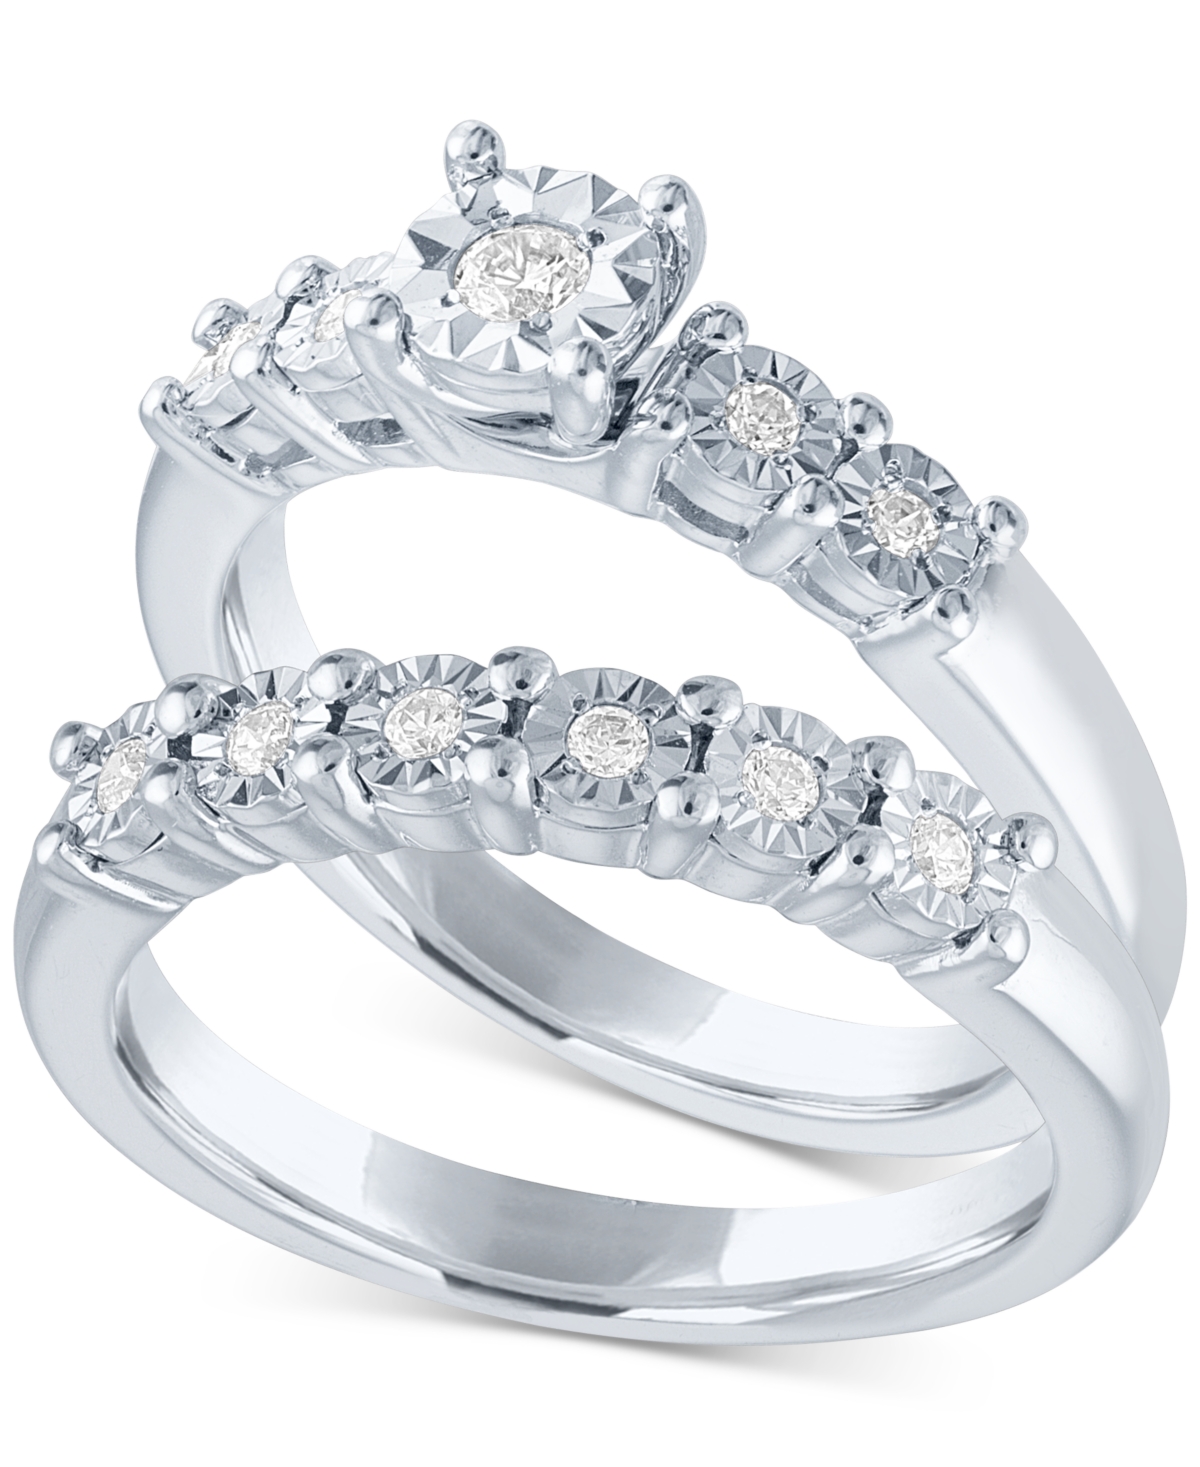 Diamond Bridal Set (1/5 ct. t.w.) in Sterling Silver - Sterling Silver